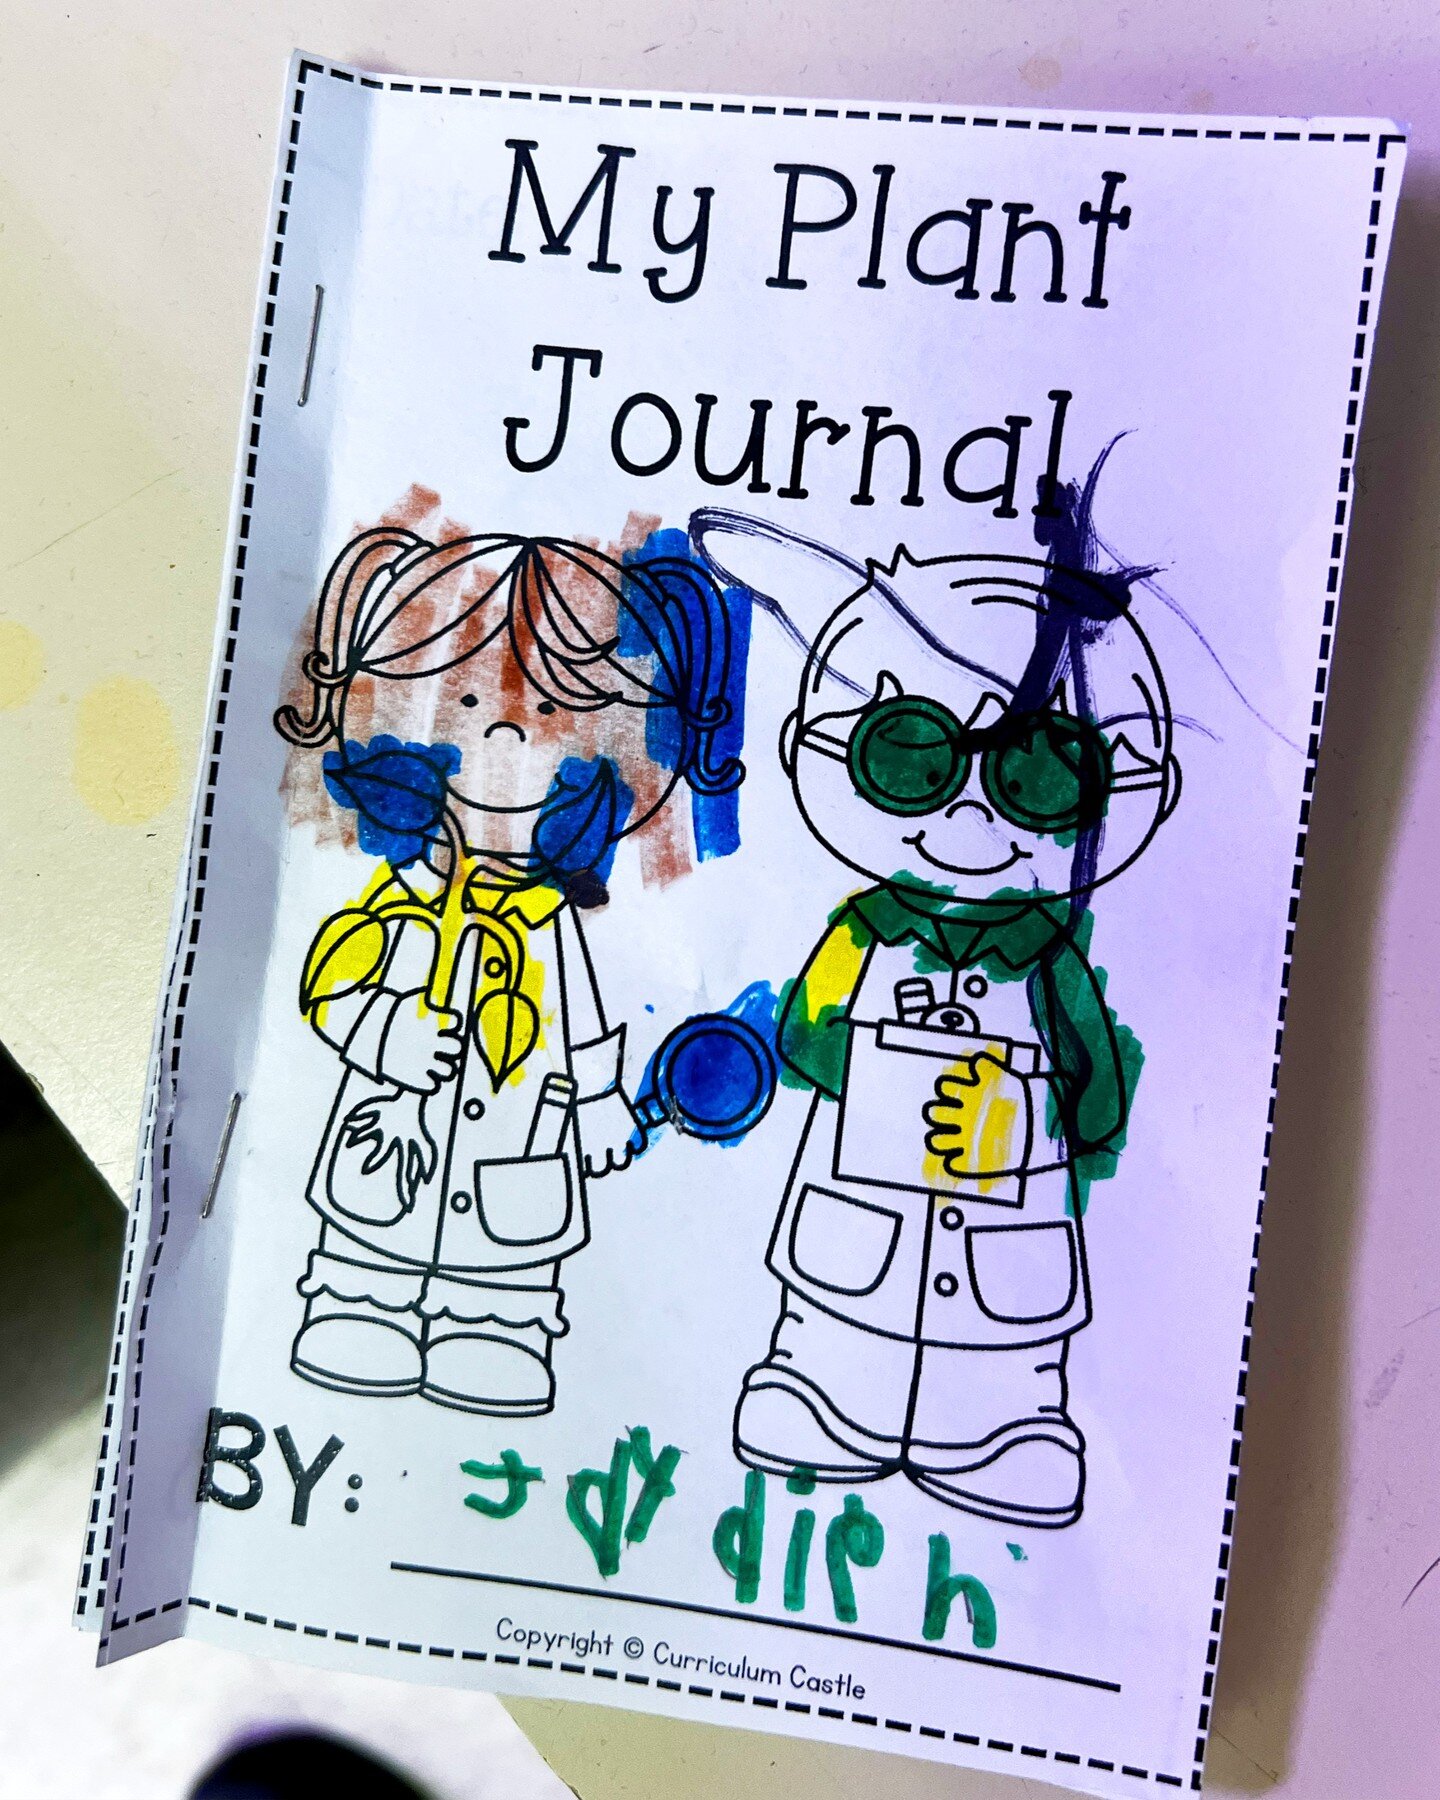 We love seeing our students&rsquo; creativity come alive, and the plant journals we provide are a great way to let them unleash their inner artist.
 
#bostonyouthfarmproject #byfp #microgreens #classroom #education #teacher #school #teachersofinstagr